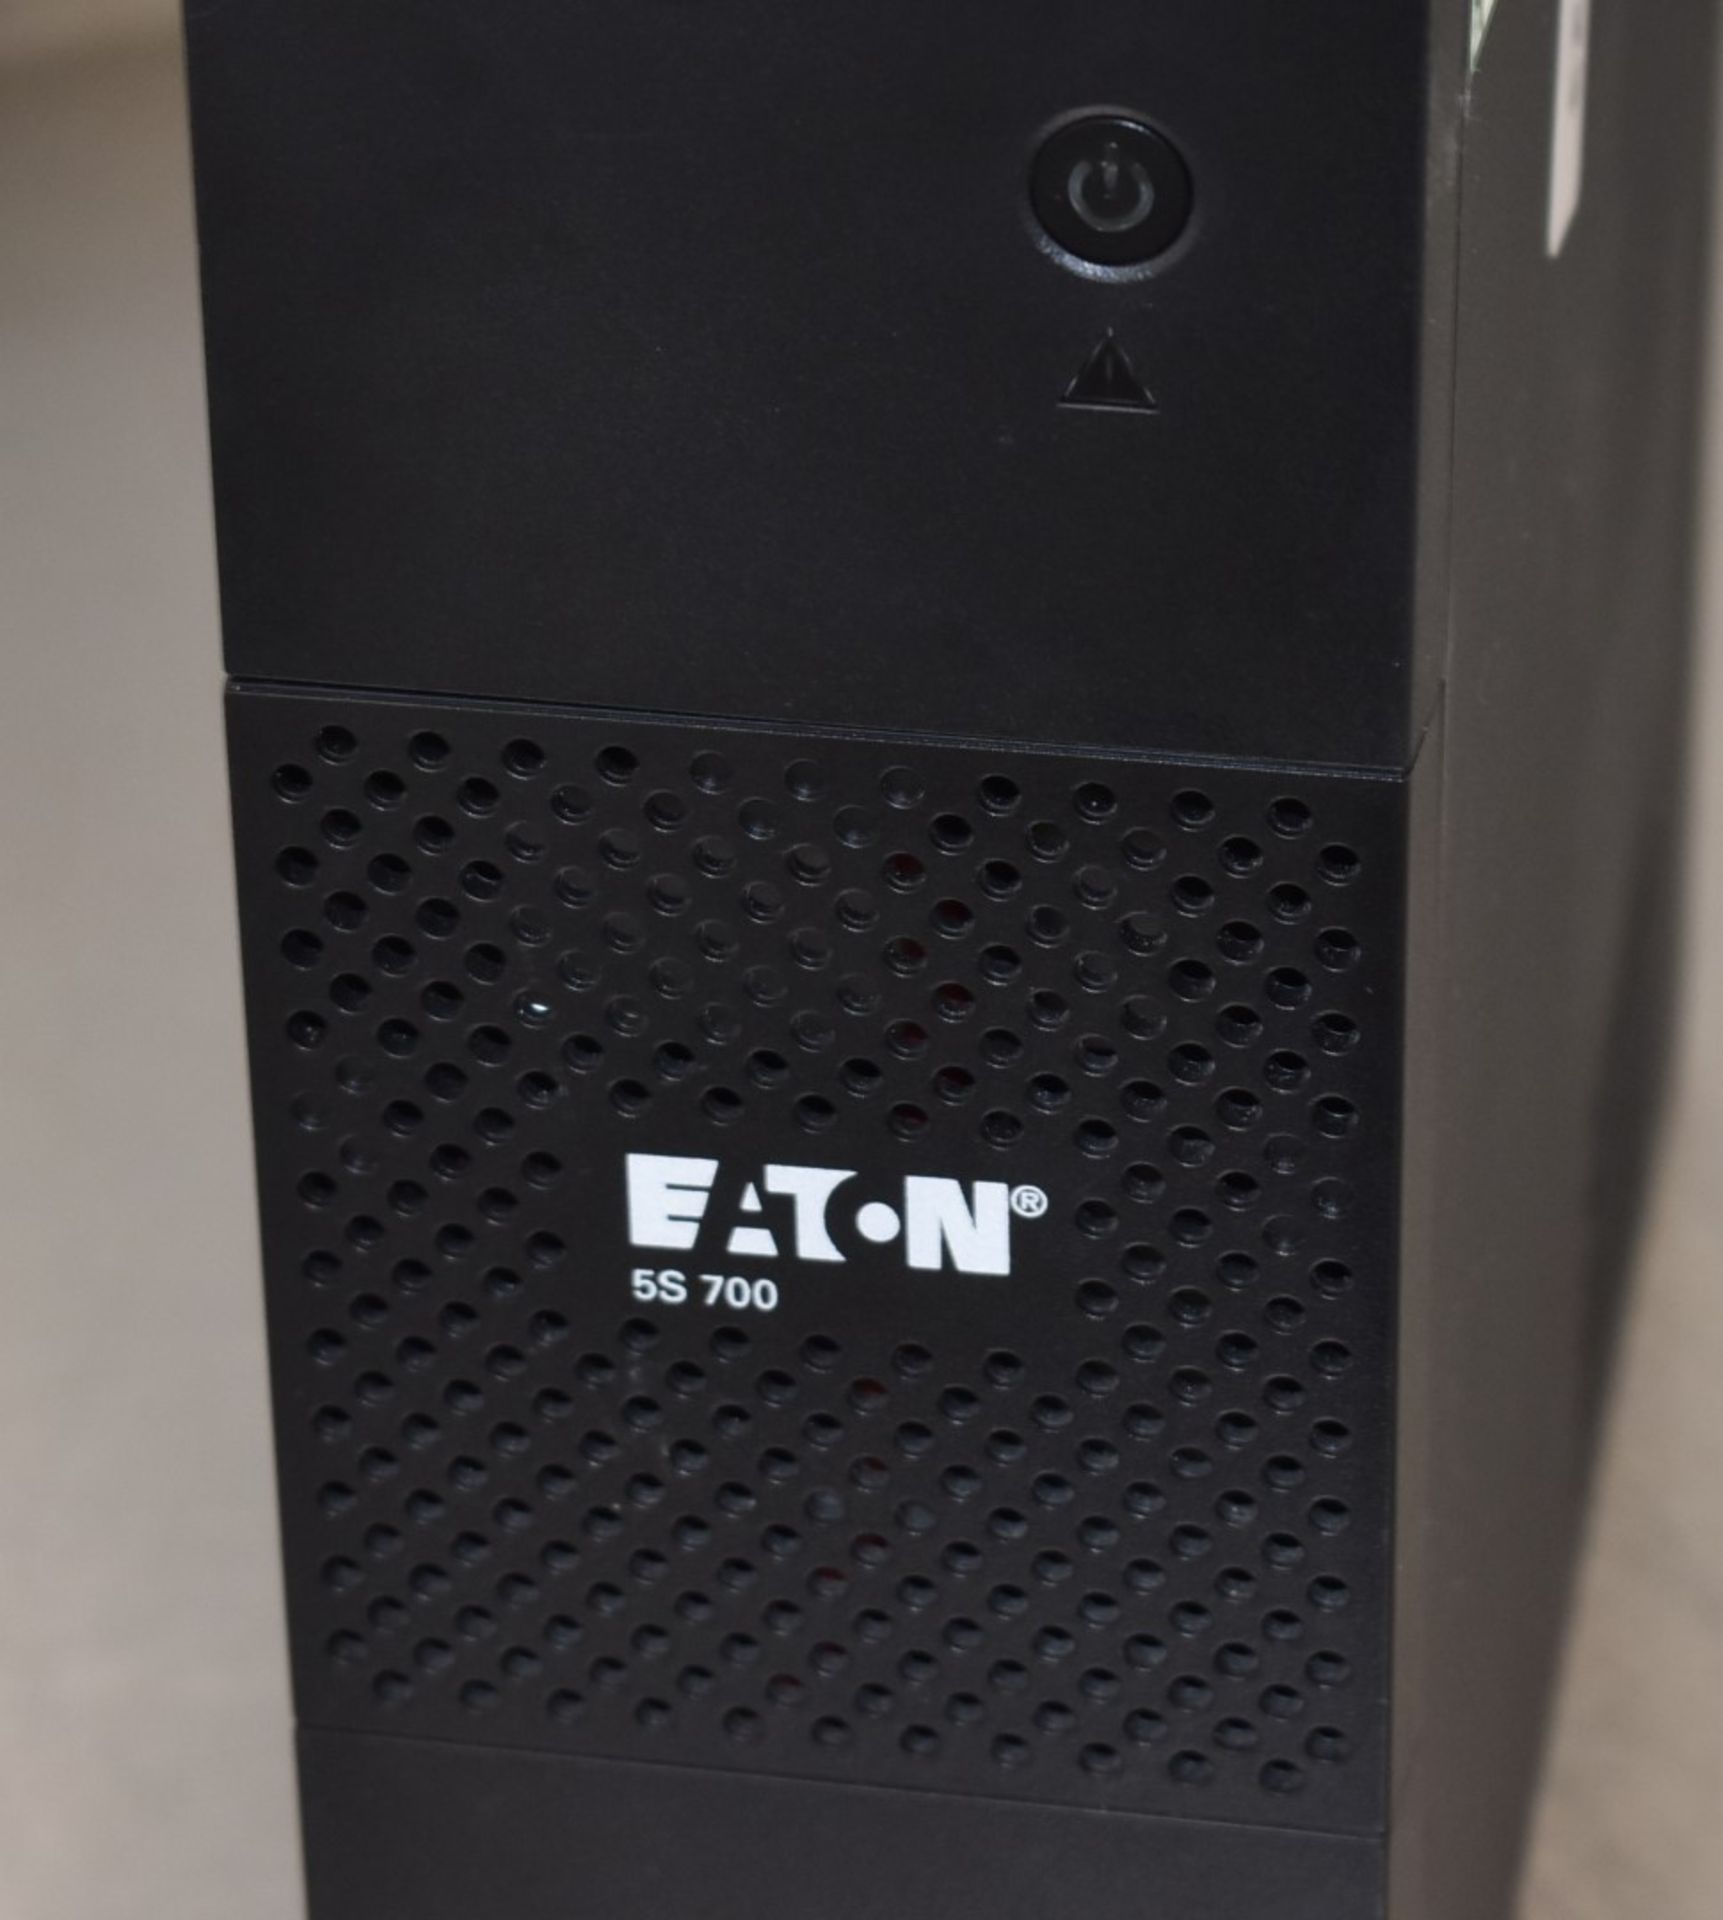 1 x EATON 5S 700 UPS Unit - From a Popular Italian-American Diner - CL804 - Ref: SFB223 - - Image 3 of 3